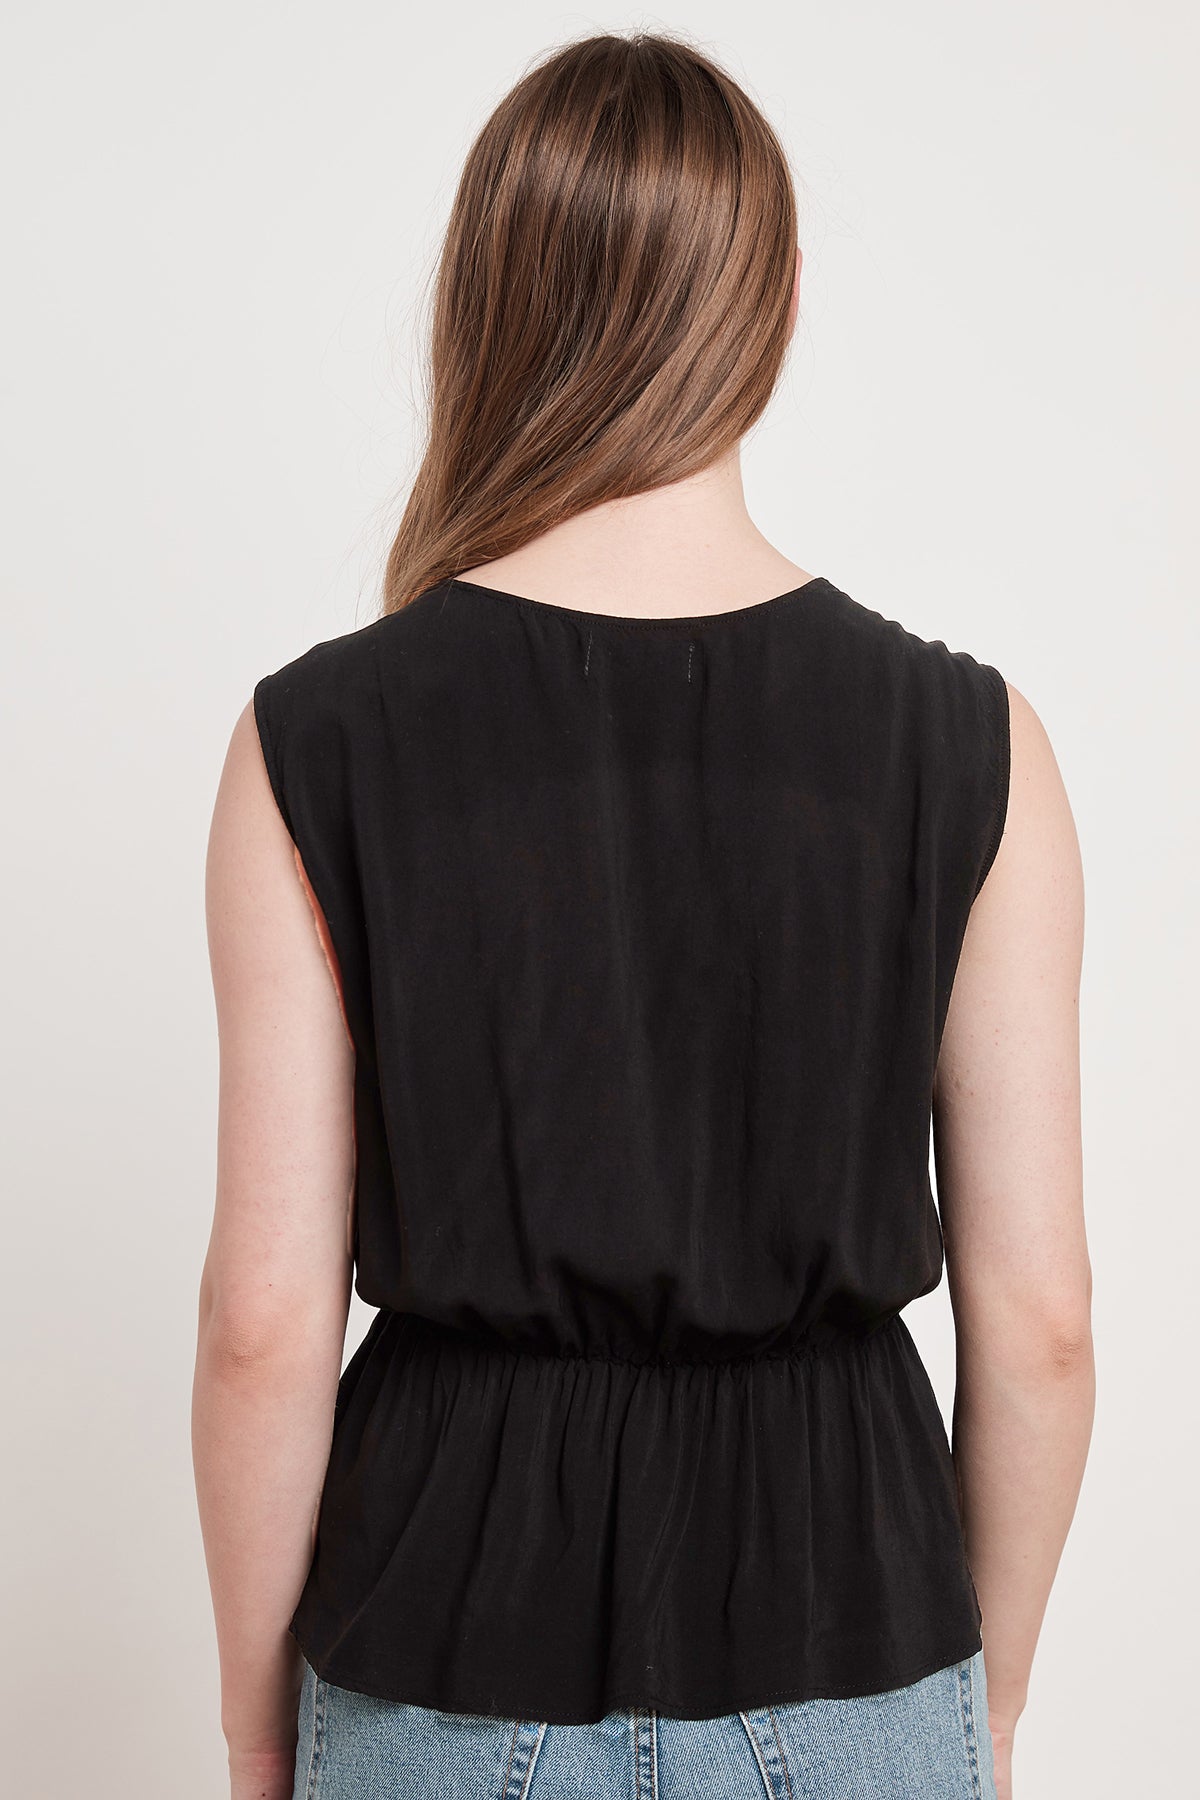   A woman in a black peplum top with a cinched waist and cross-over front, the ADALI WRAP BLOUSE by Velvet by Graham & Spencer. 